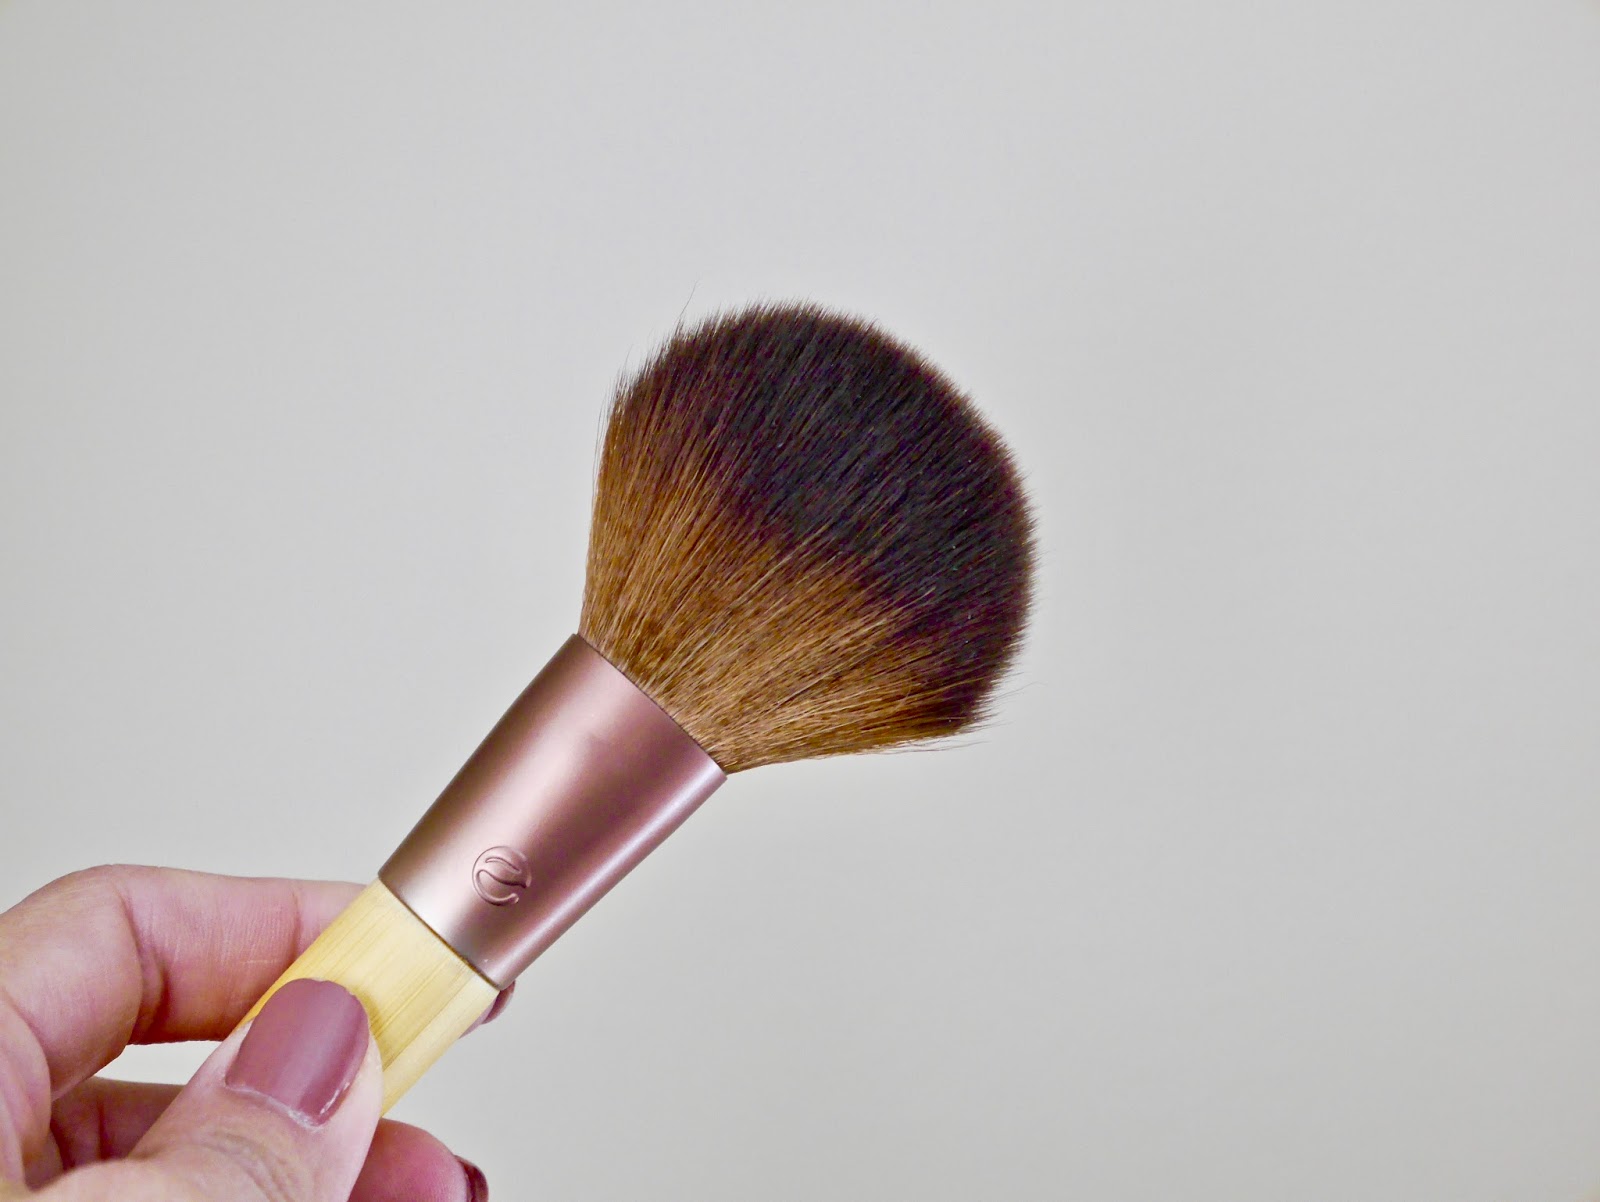 eco-friendly, cruelty free, makeup brushes, brushes, Canadian beauty